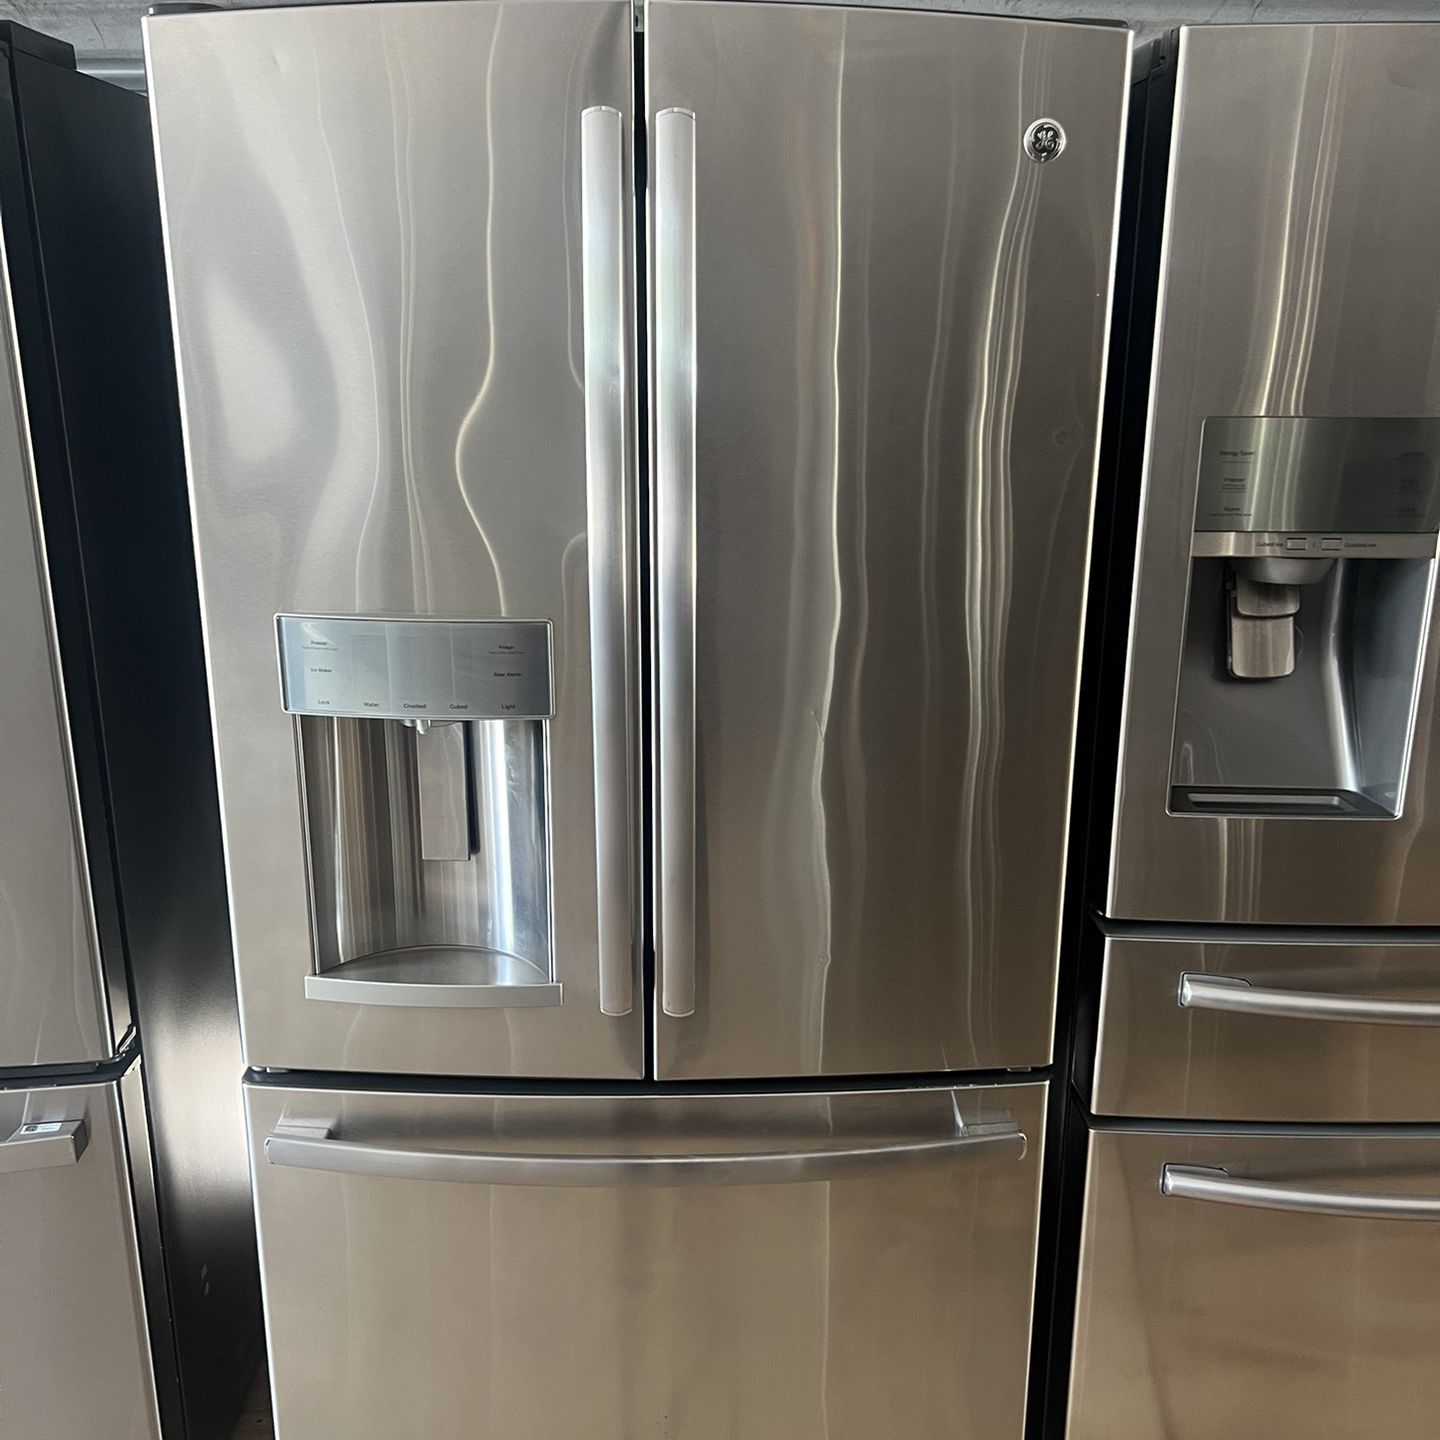 Ge French Door Refrigerator   60 day warranty/ Located at:📍5415 Carmack Rd Tampa Fl 33610📍 